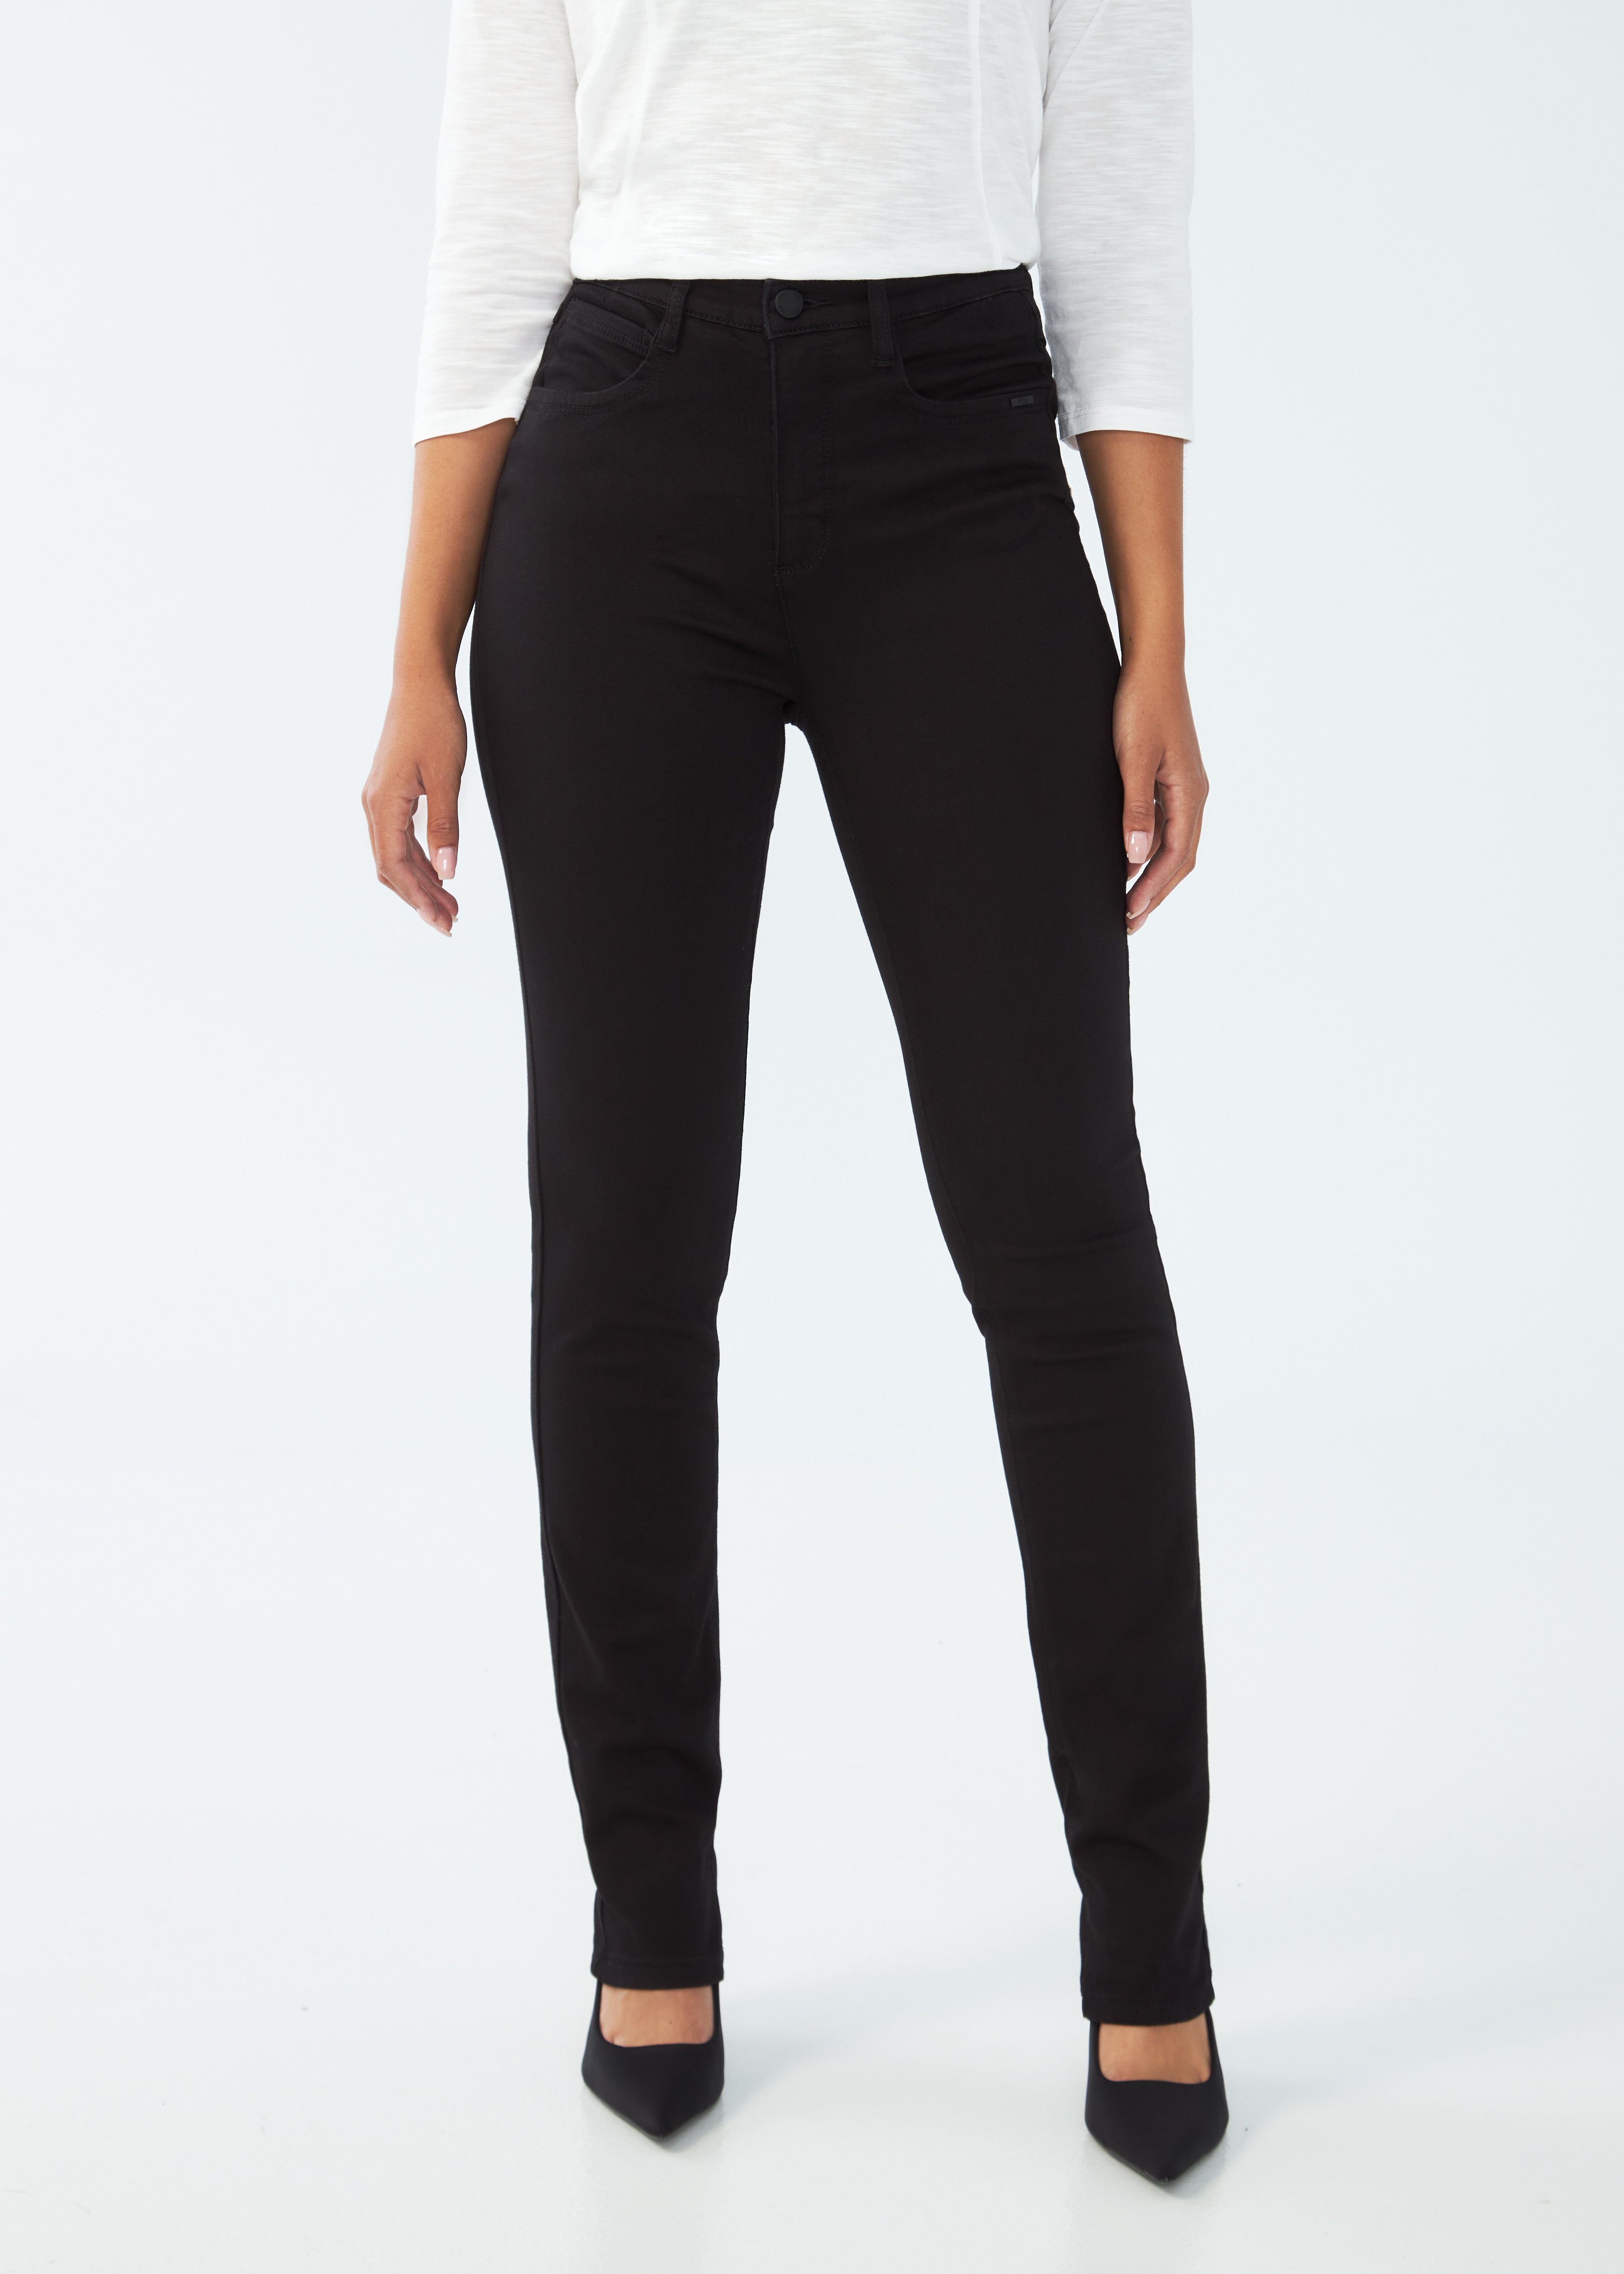 No wardrobe is complete without spectacular black jeans! For women with slimmer curves, consider our super-flattering Suzanne Onyx Denim.